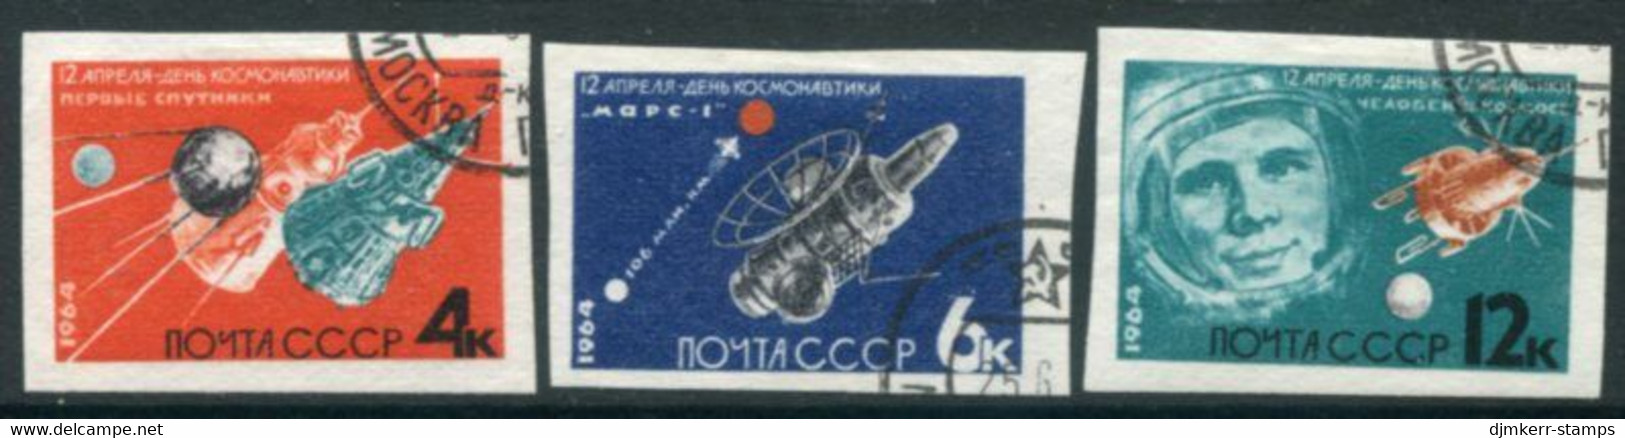 SOVIET UNION 1964 Cosmonauts Day Imperforate Used.  Michel 2895-97 B - Used Stamps